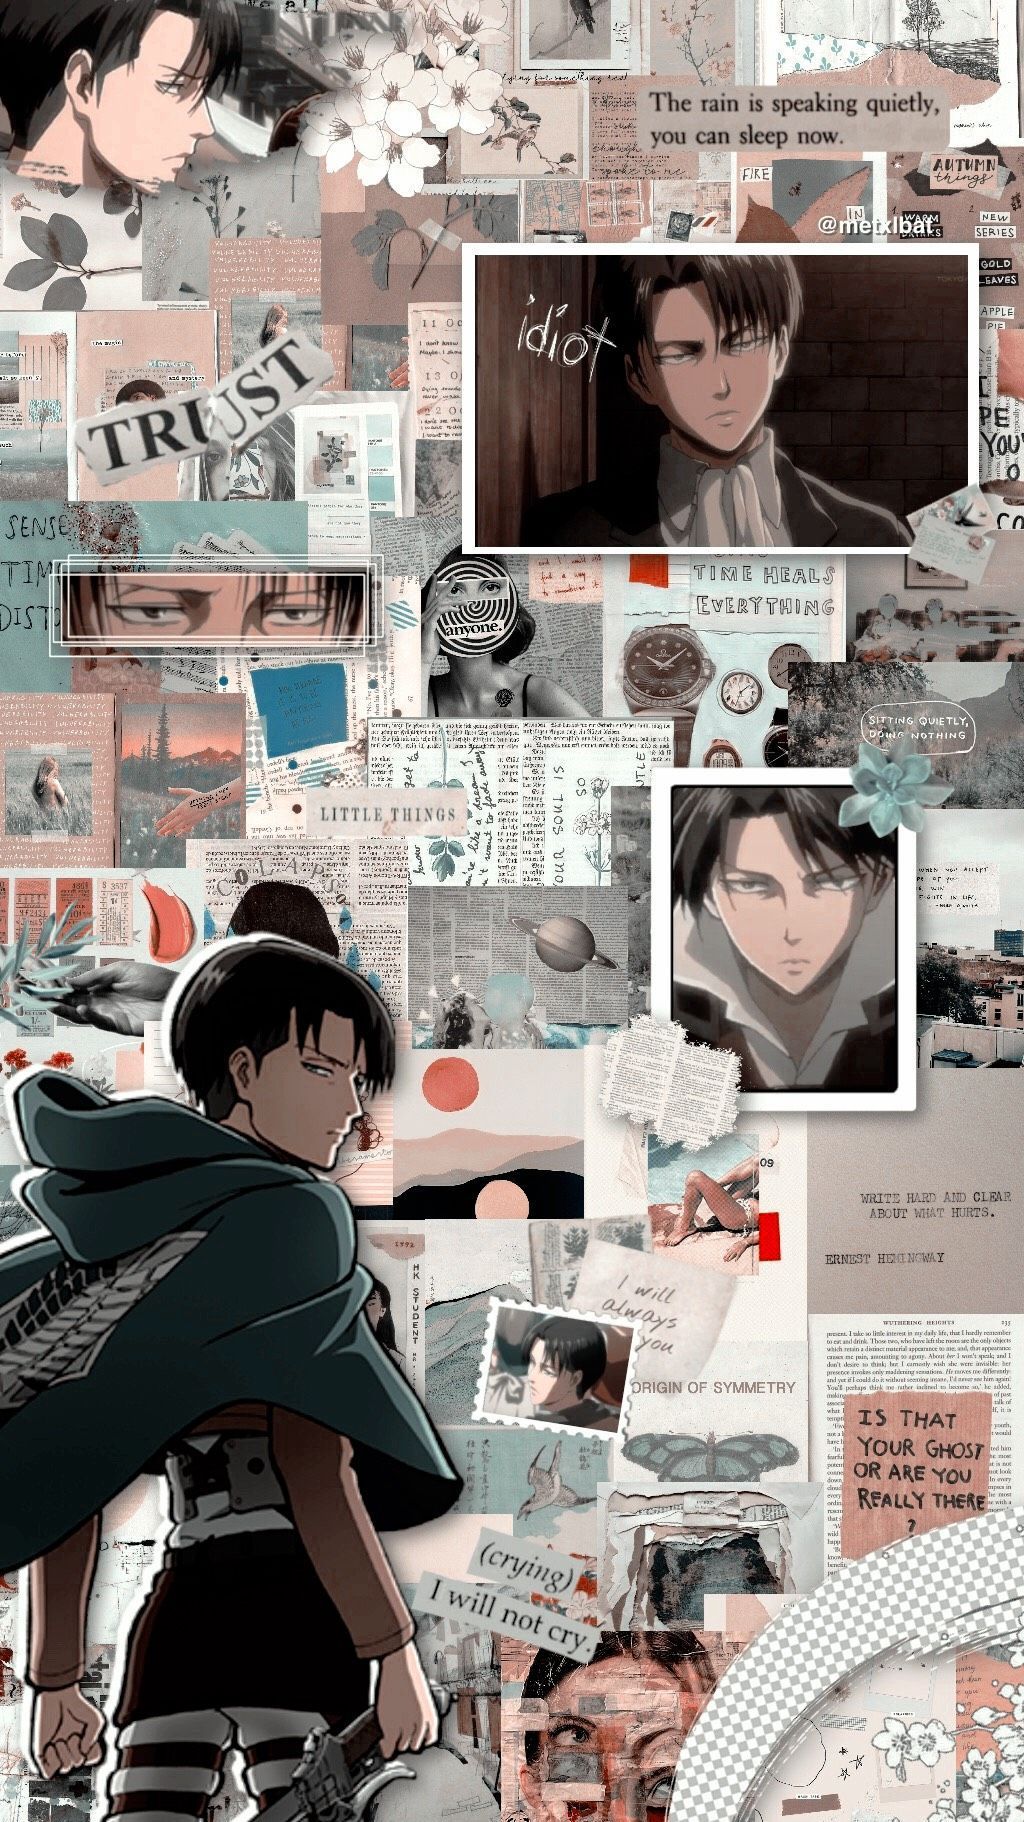 Aot Aesthetic Wallpapers